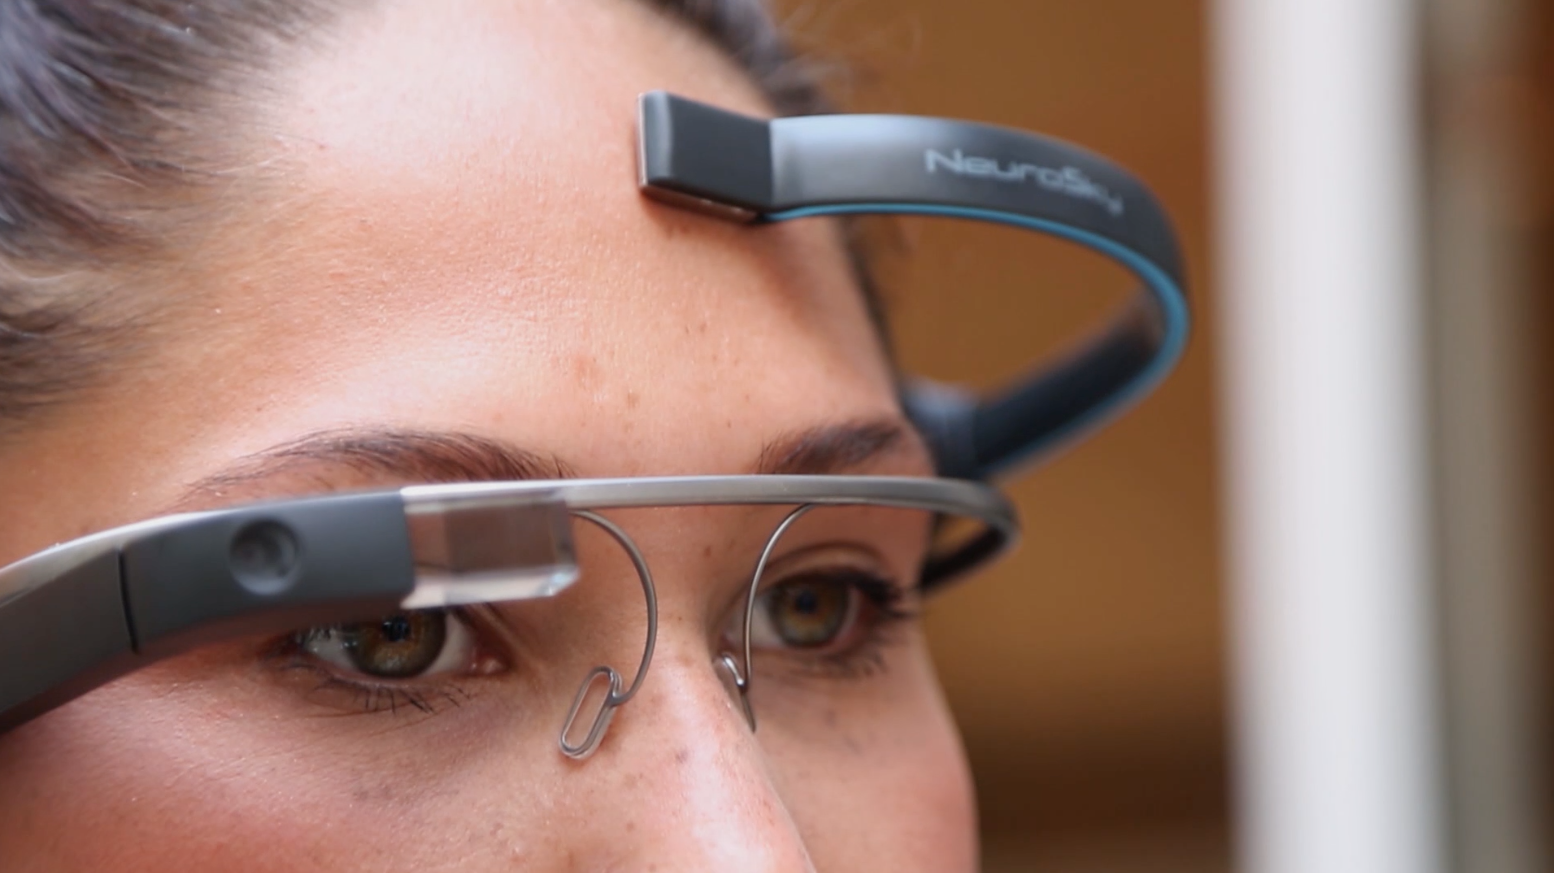 MindRDR App Enables Google Glass Control with Brainwaves